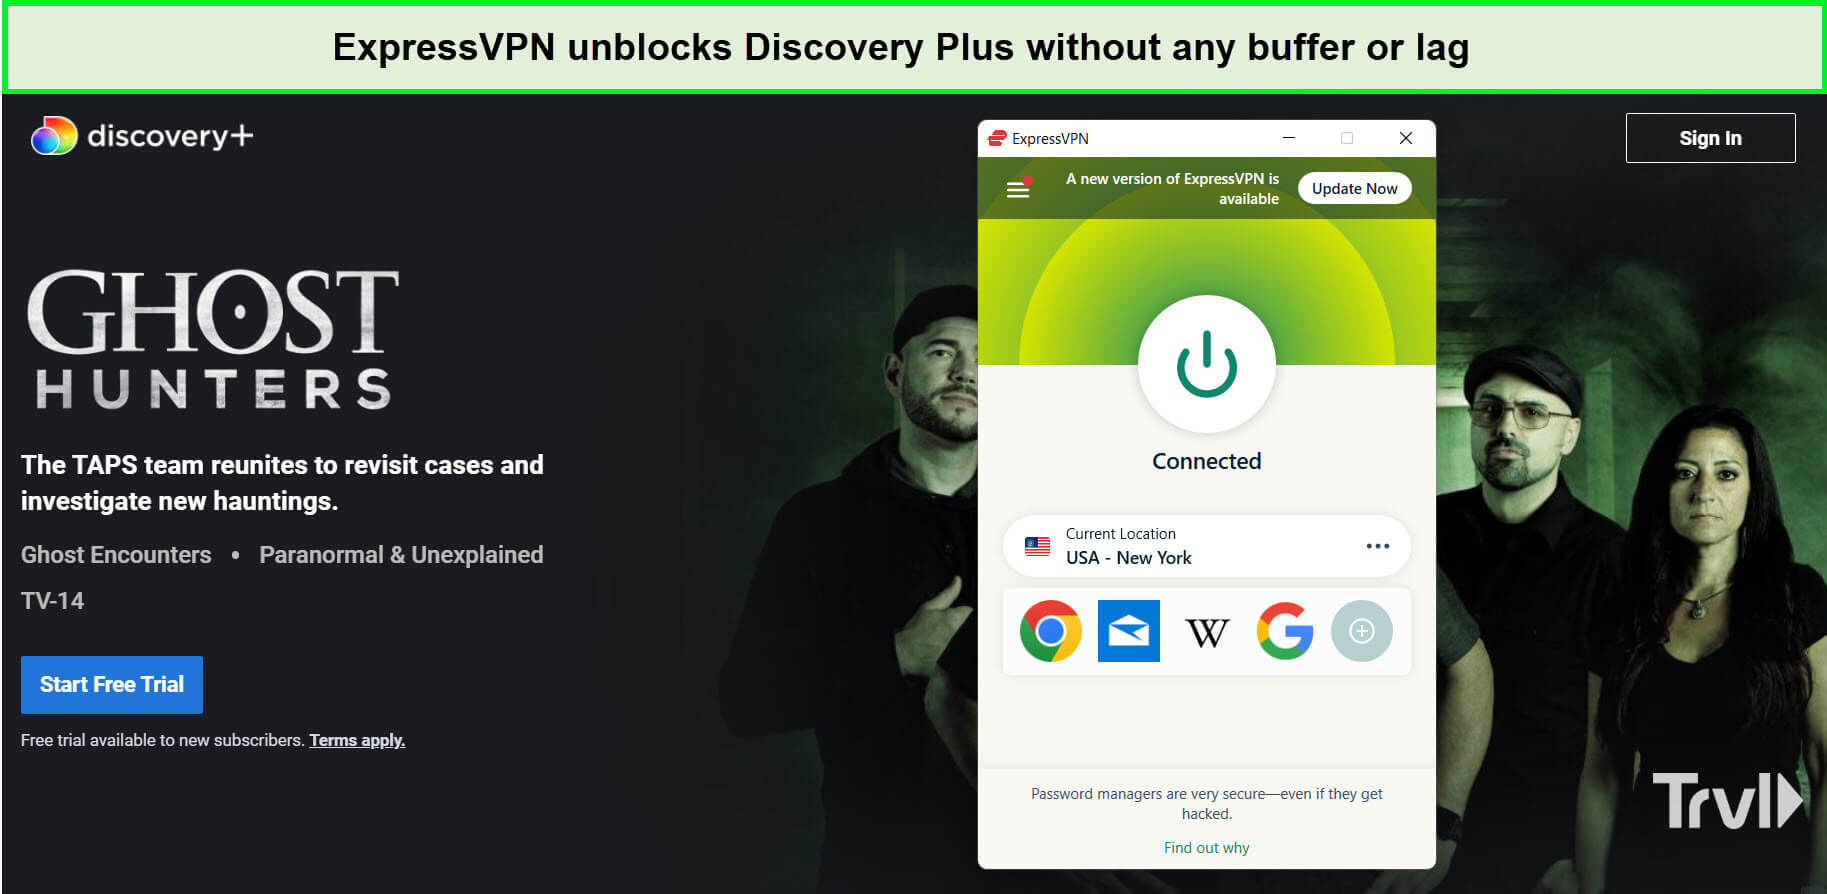 expressvpn-unblocks-ghost-hunters-on-discovery-plus-in-Italy